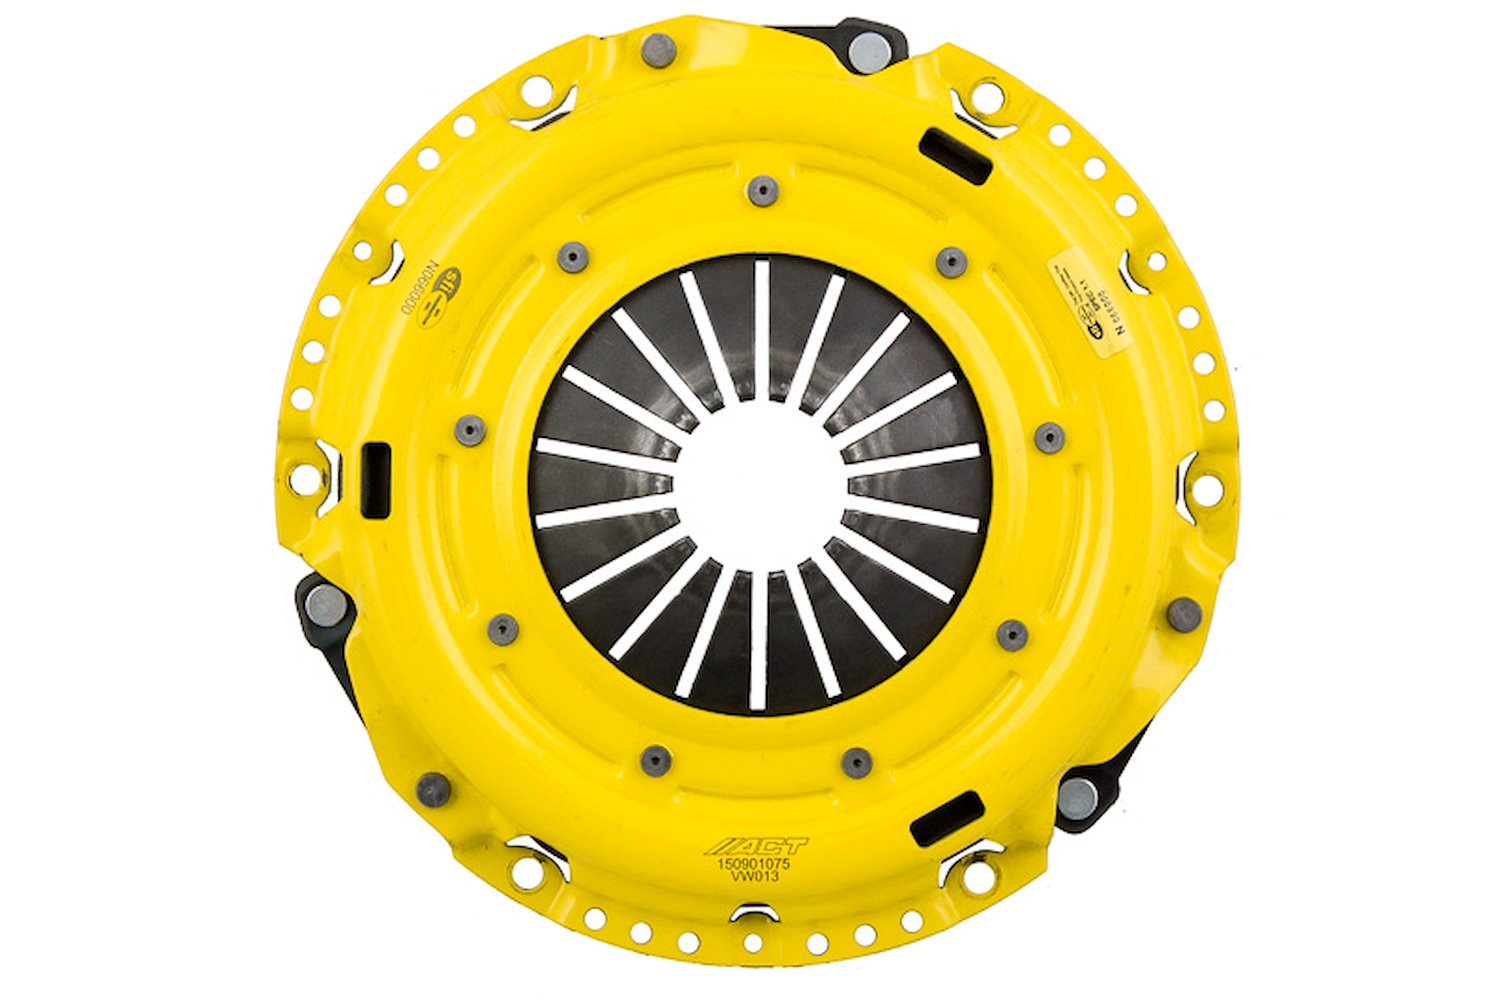 Heavy-Duty Transmission Clutch Pressure Plate Fits Select Audi/Volkswagen